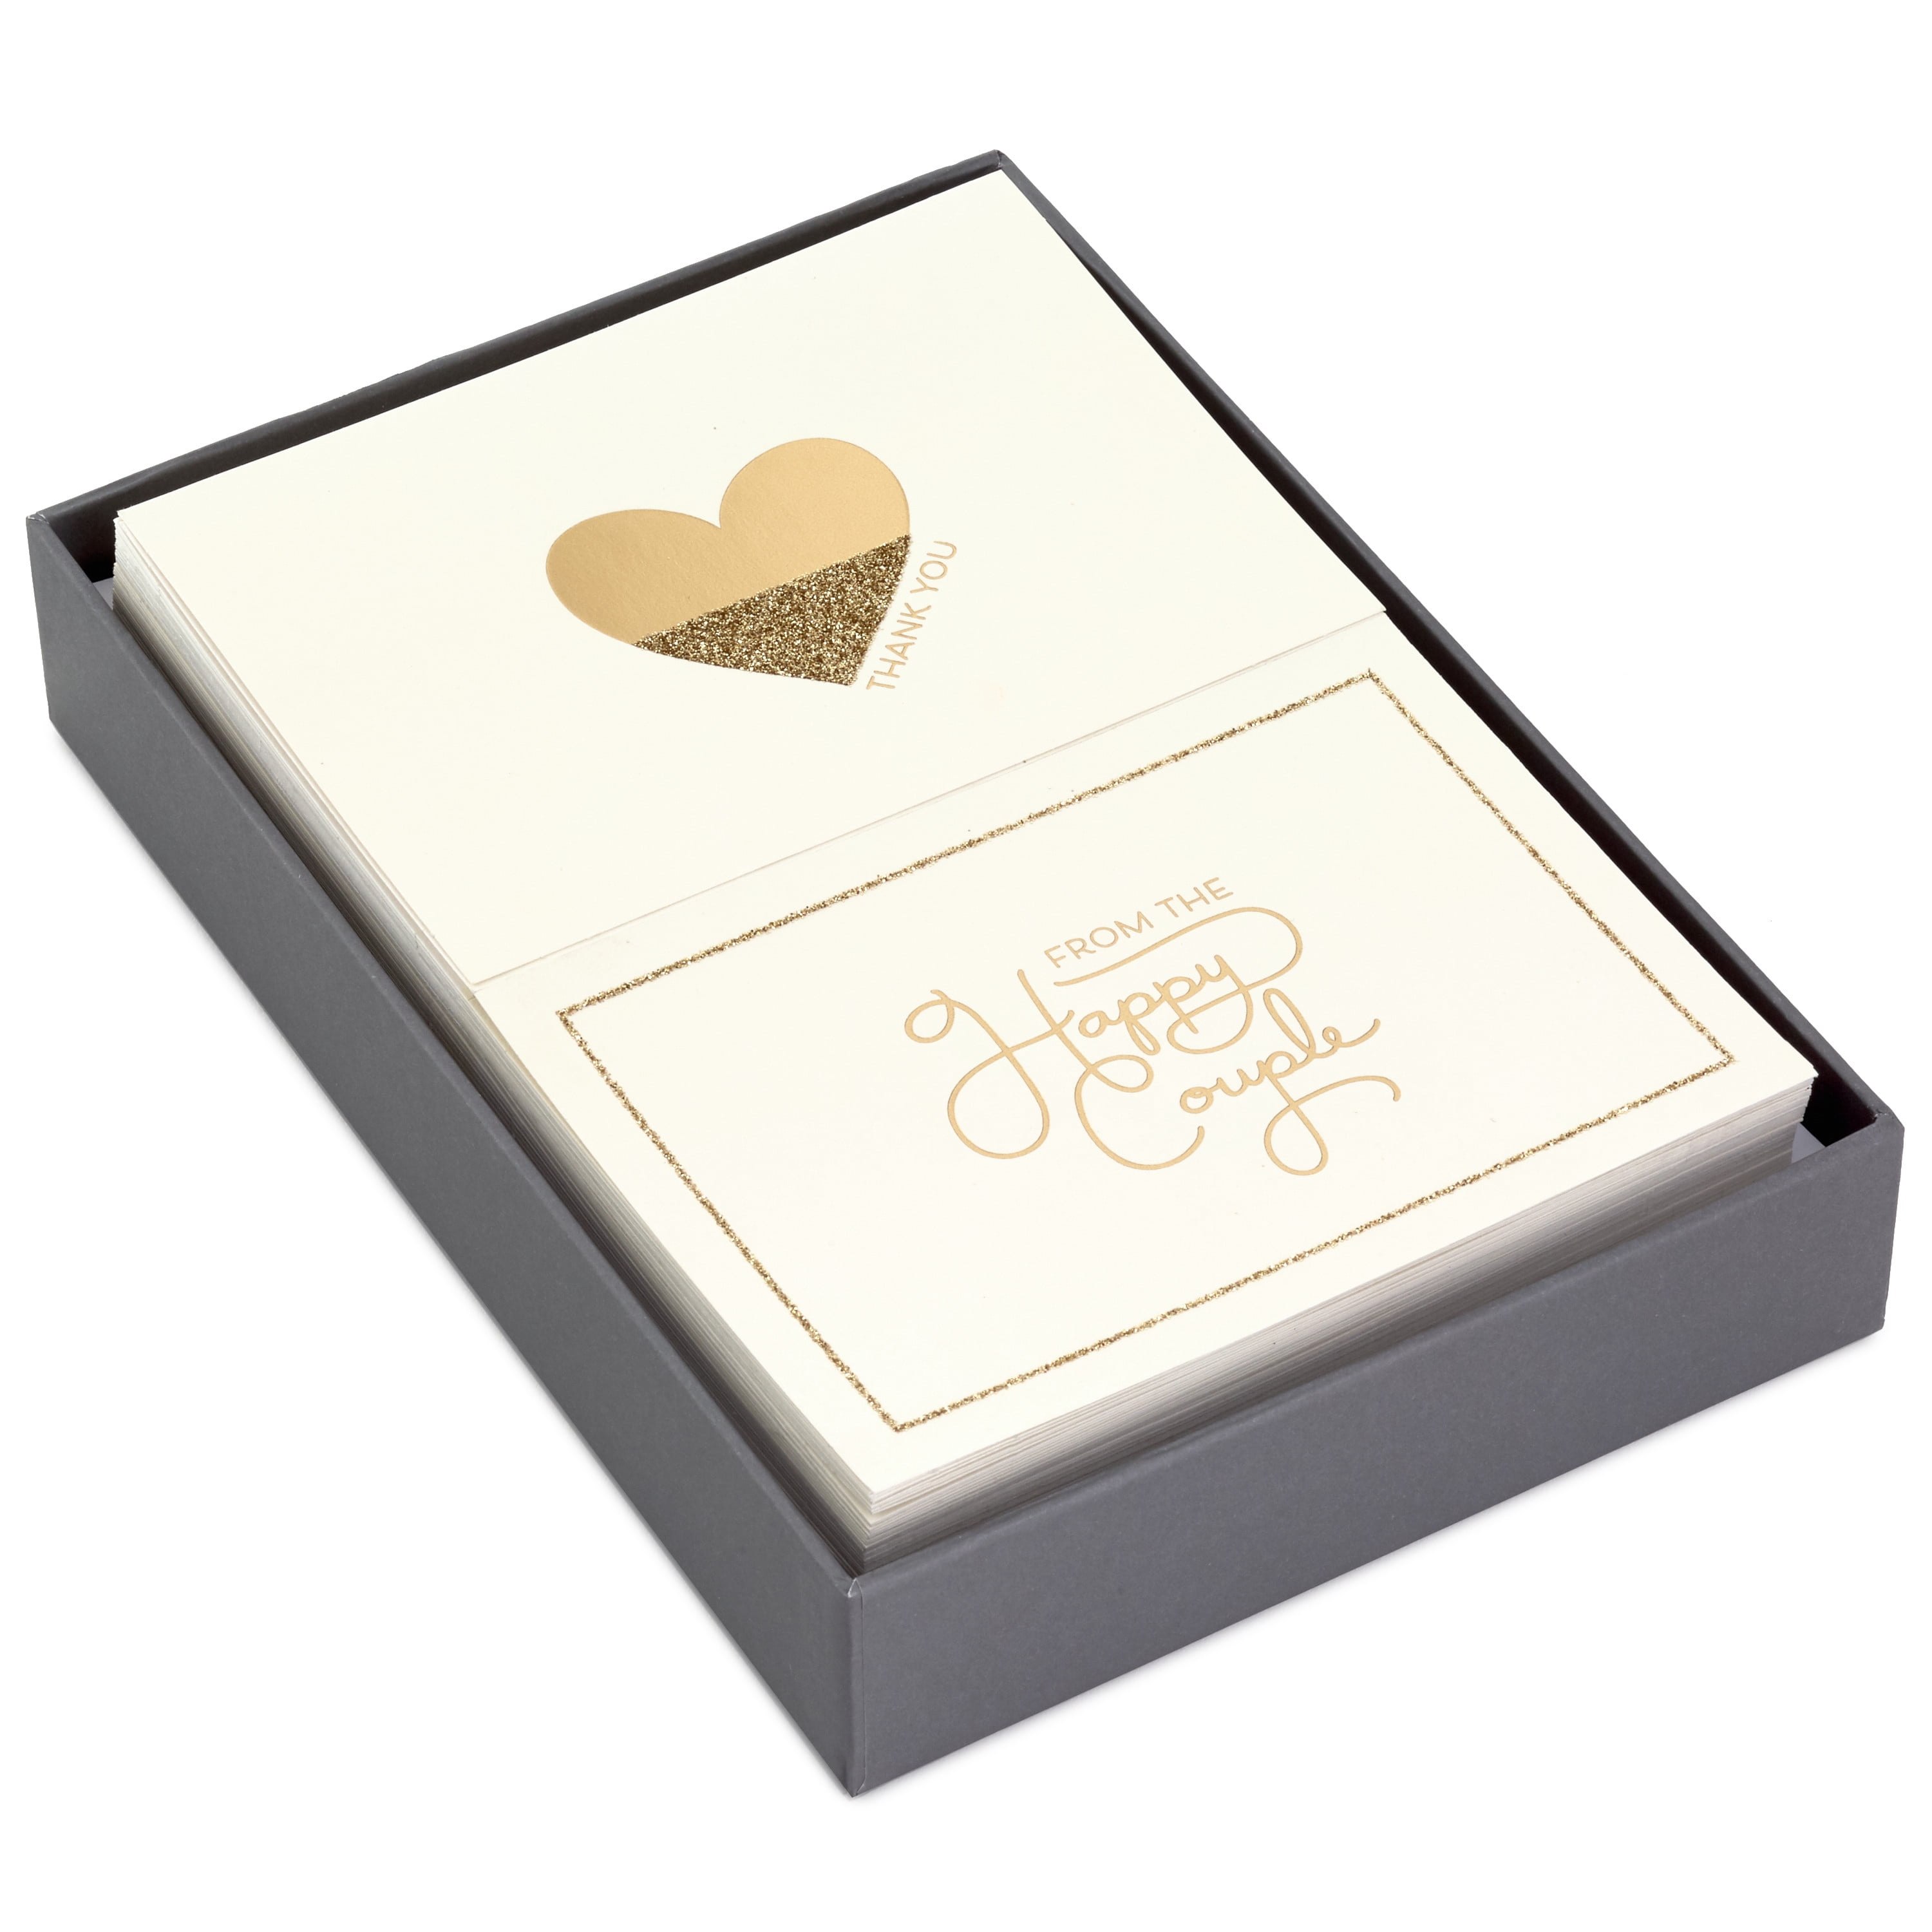 Hallmark Wedding Thank-You Notes, Gold Heart and From the Happy Couple, 50 ct.